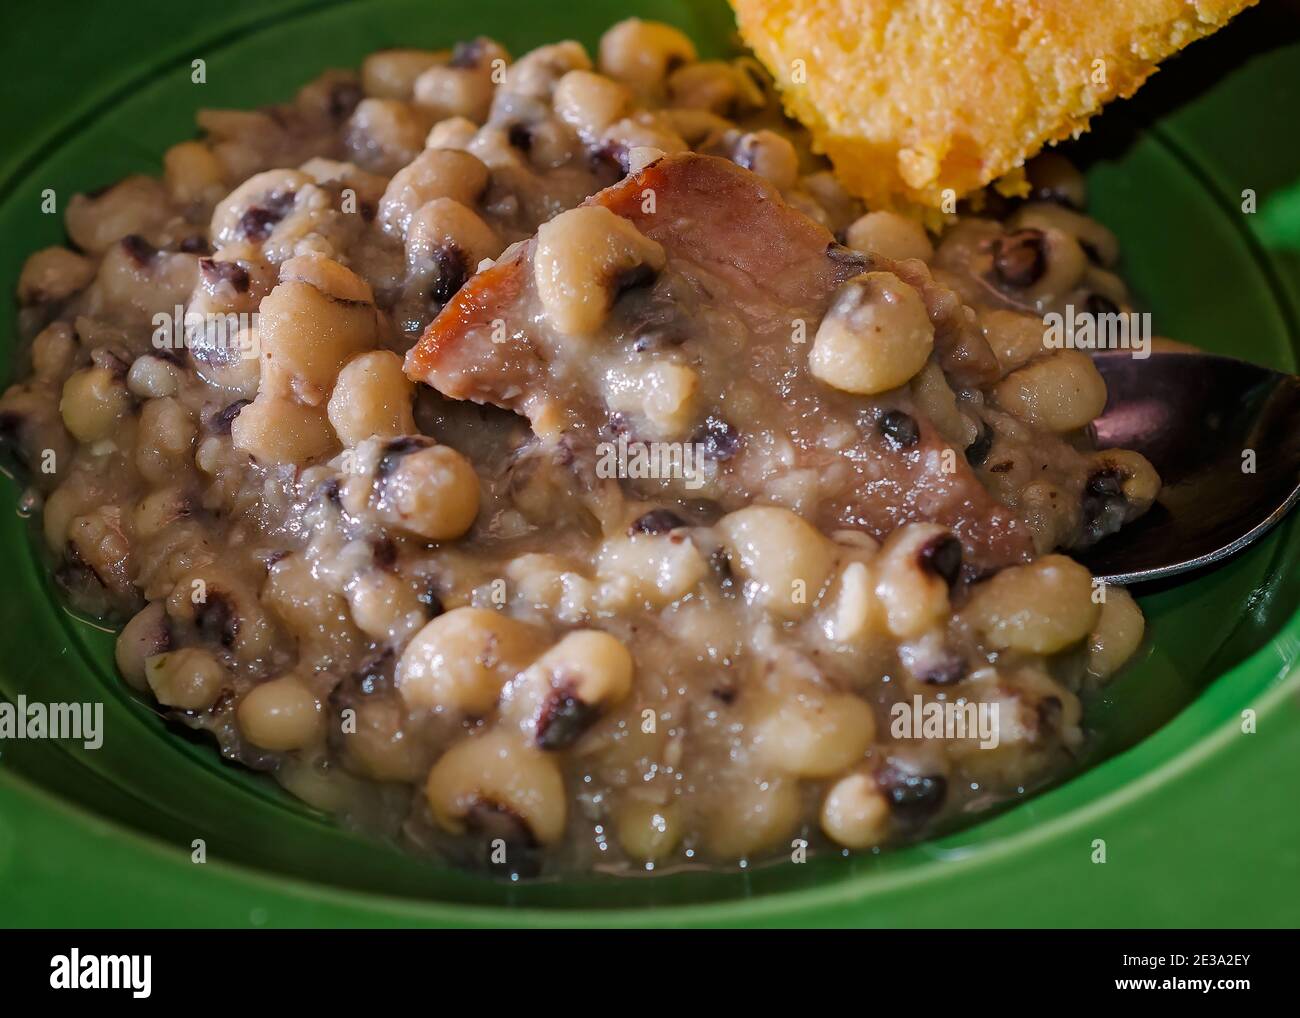 Black-eyed peas, also known as Hoppin’ John, is served with cornbread as a traditional New Year’s Day dinner in the Southern United States. Stock Photo